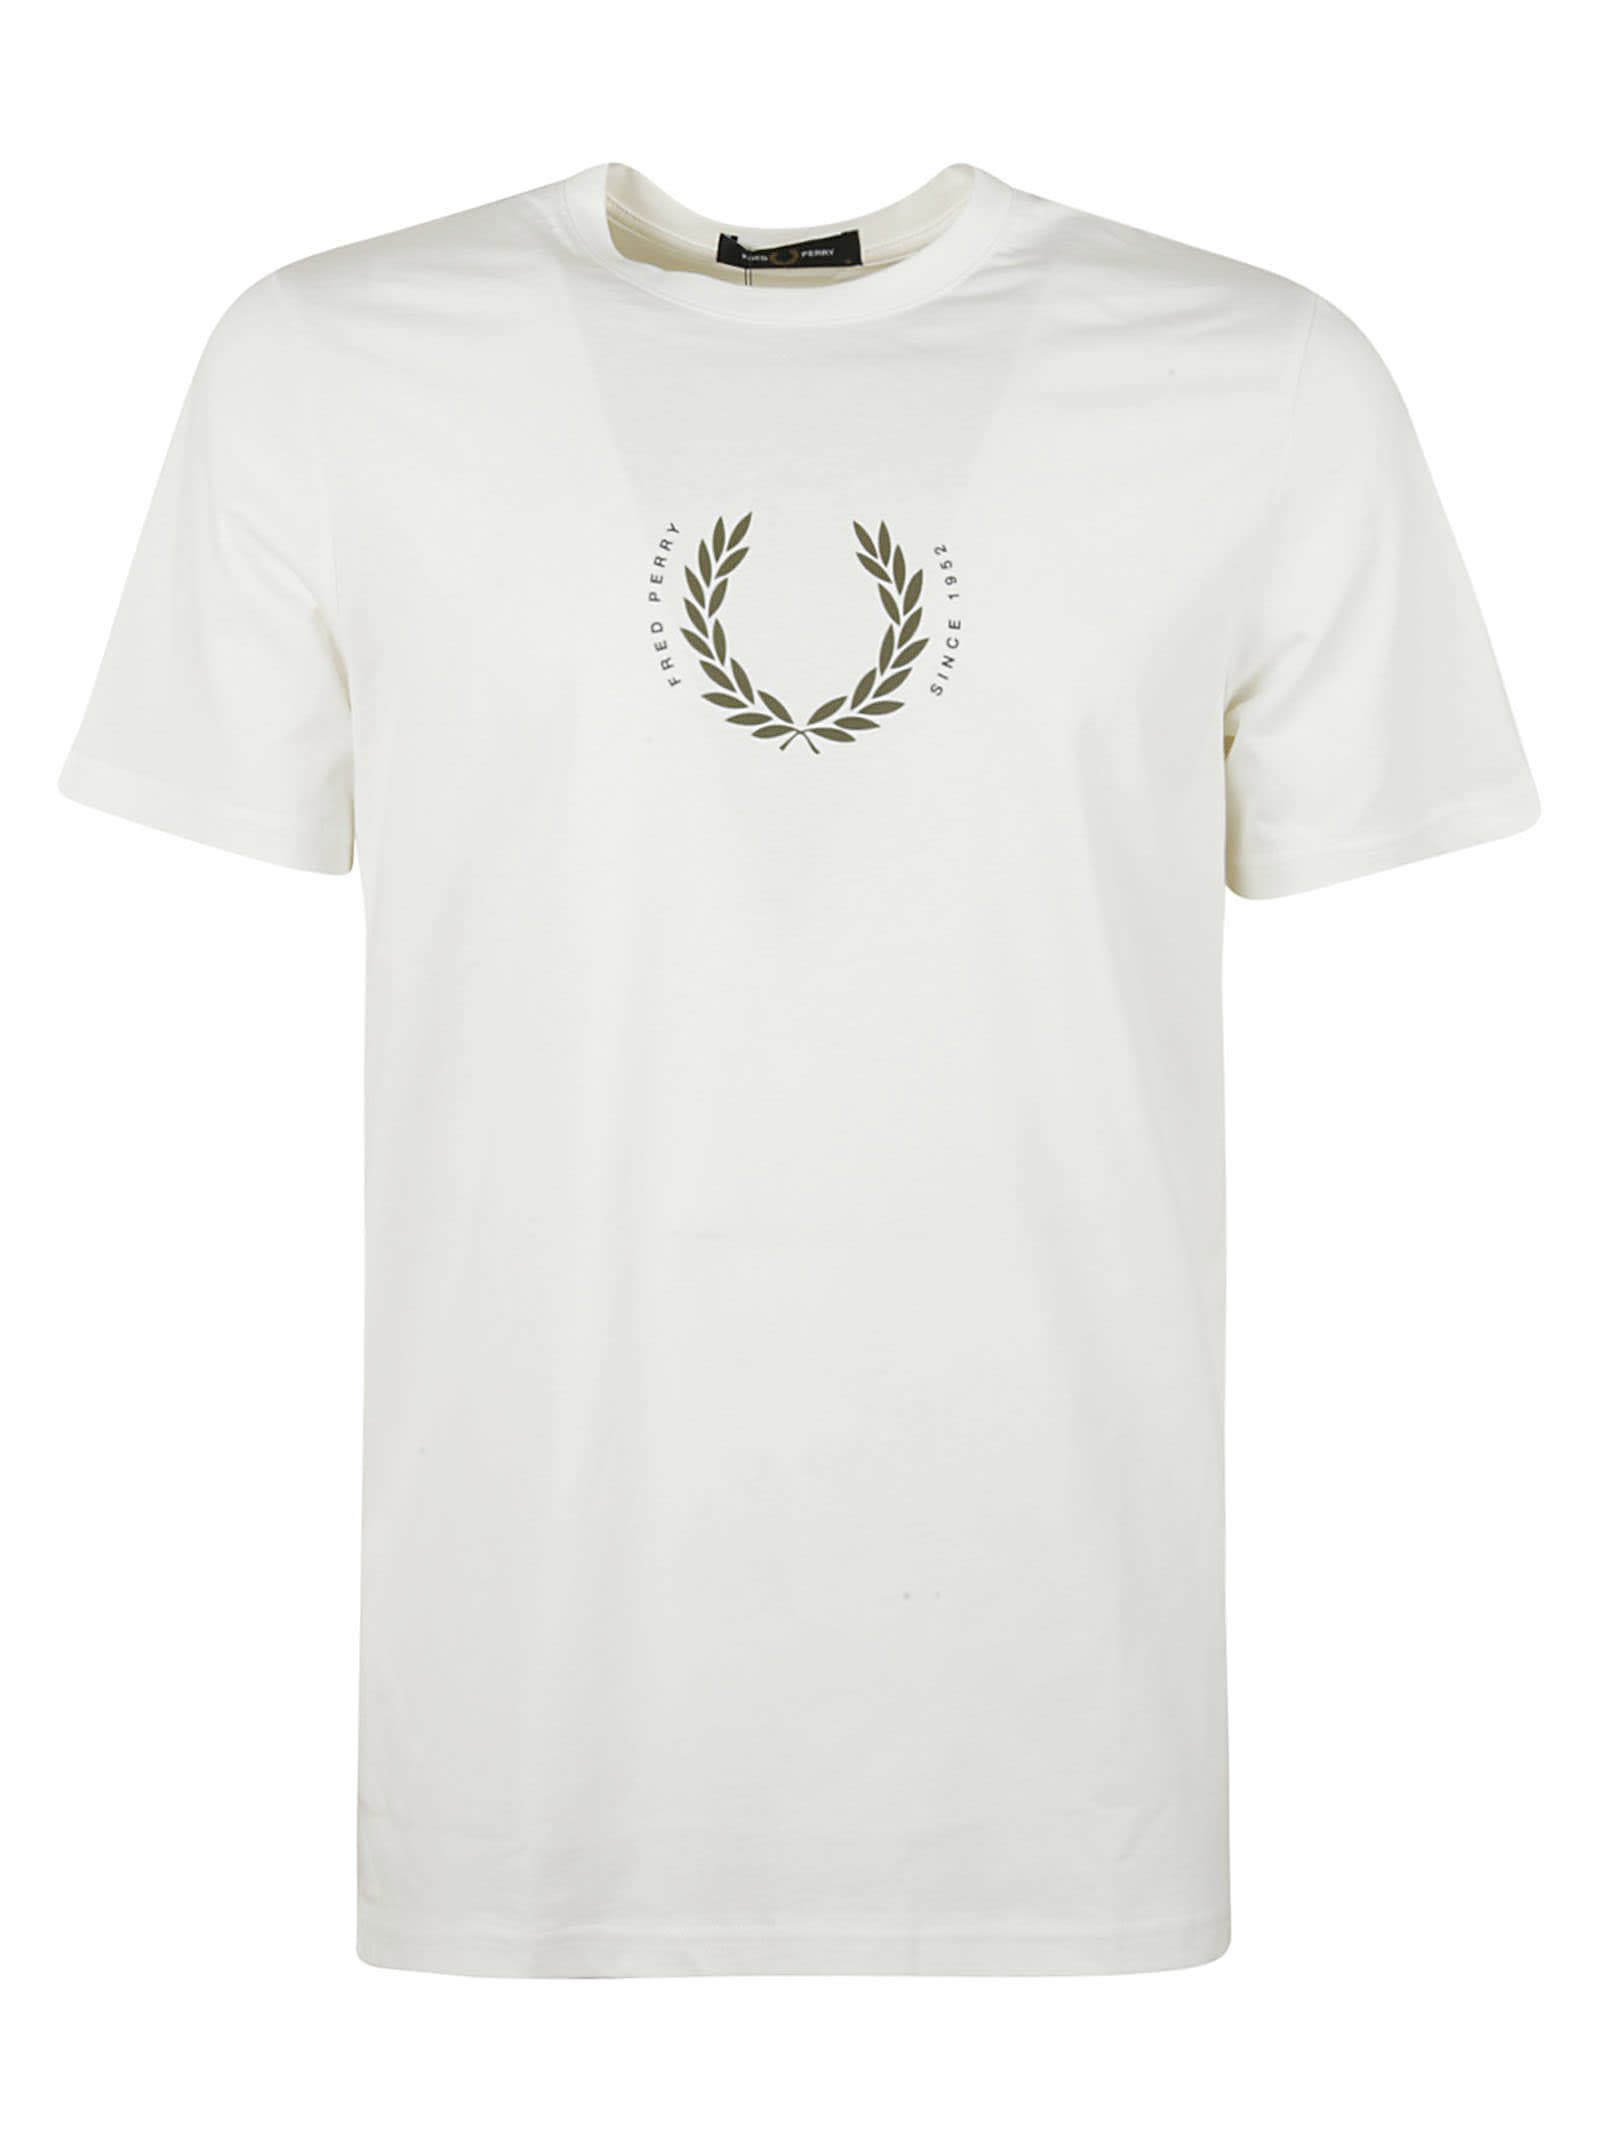 Fred Perry Laurel Wreath T-shirt